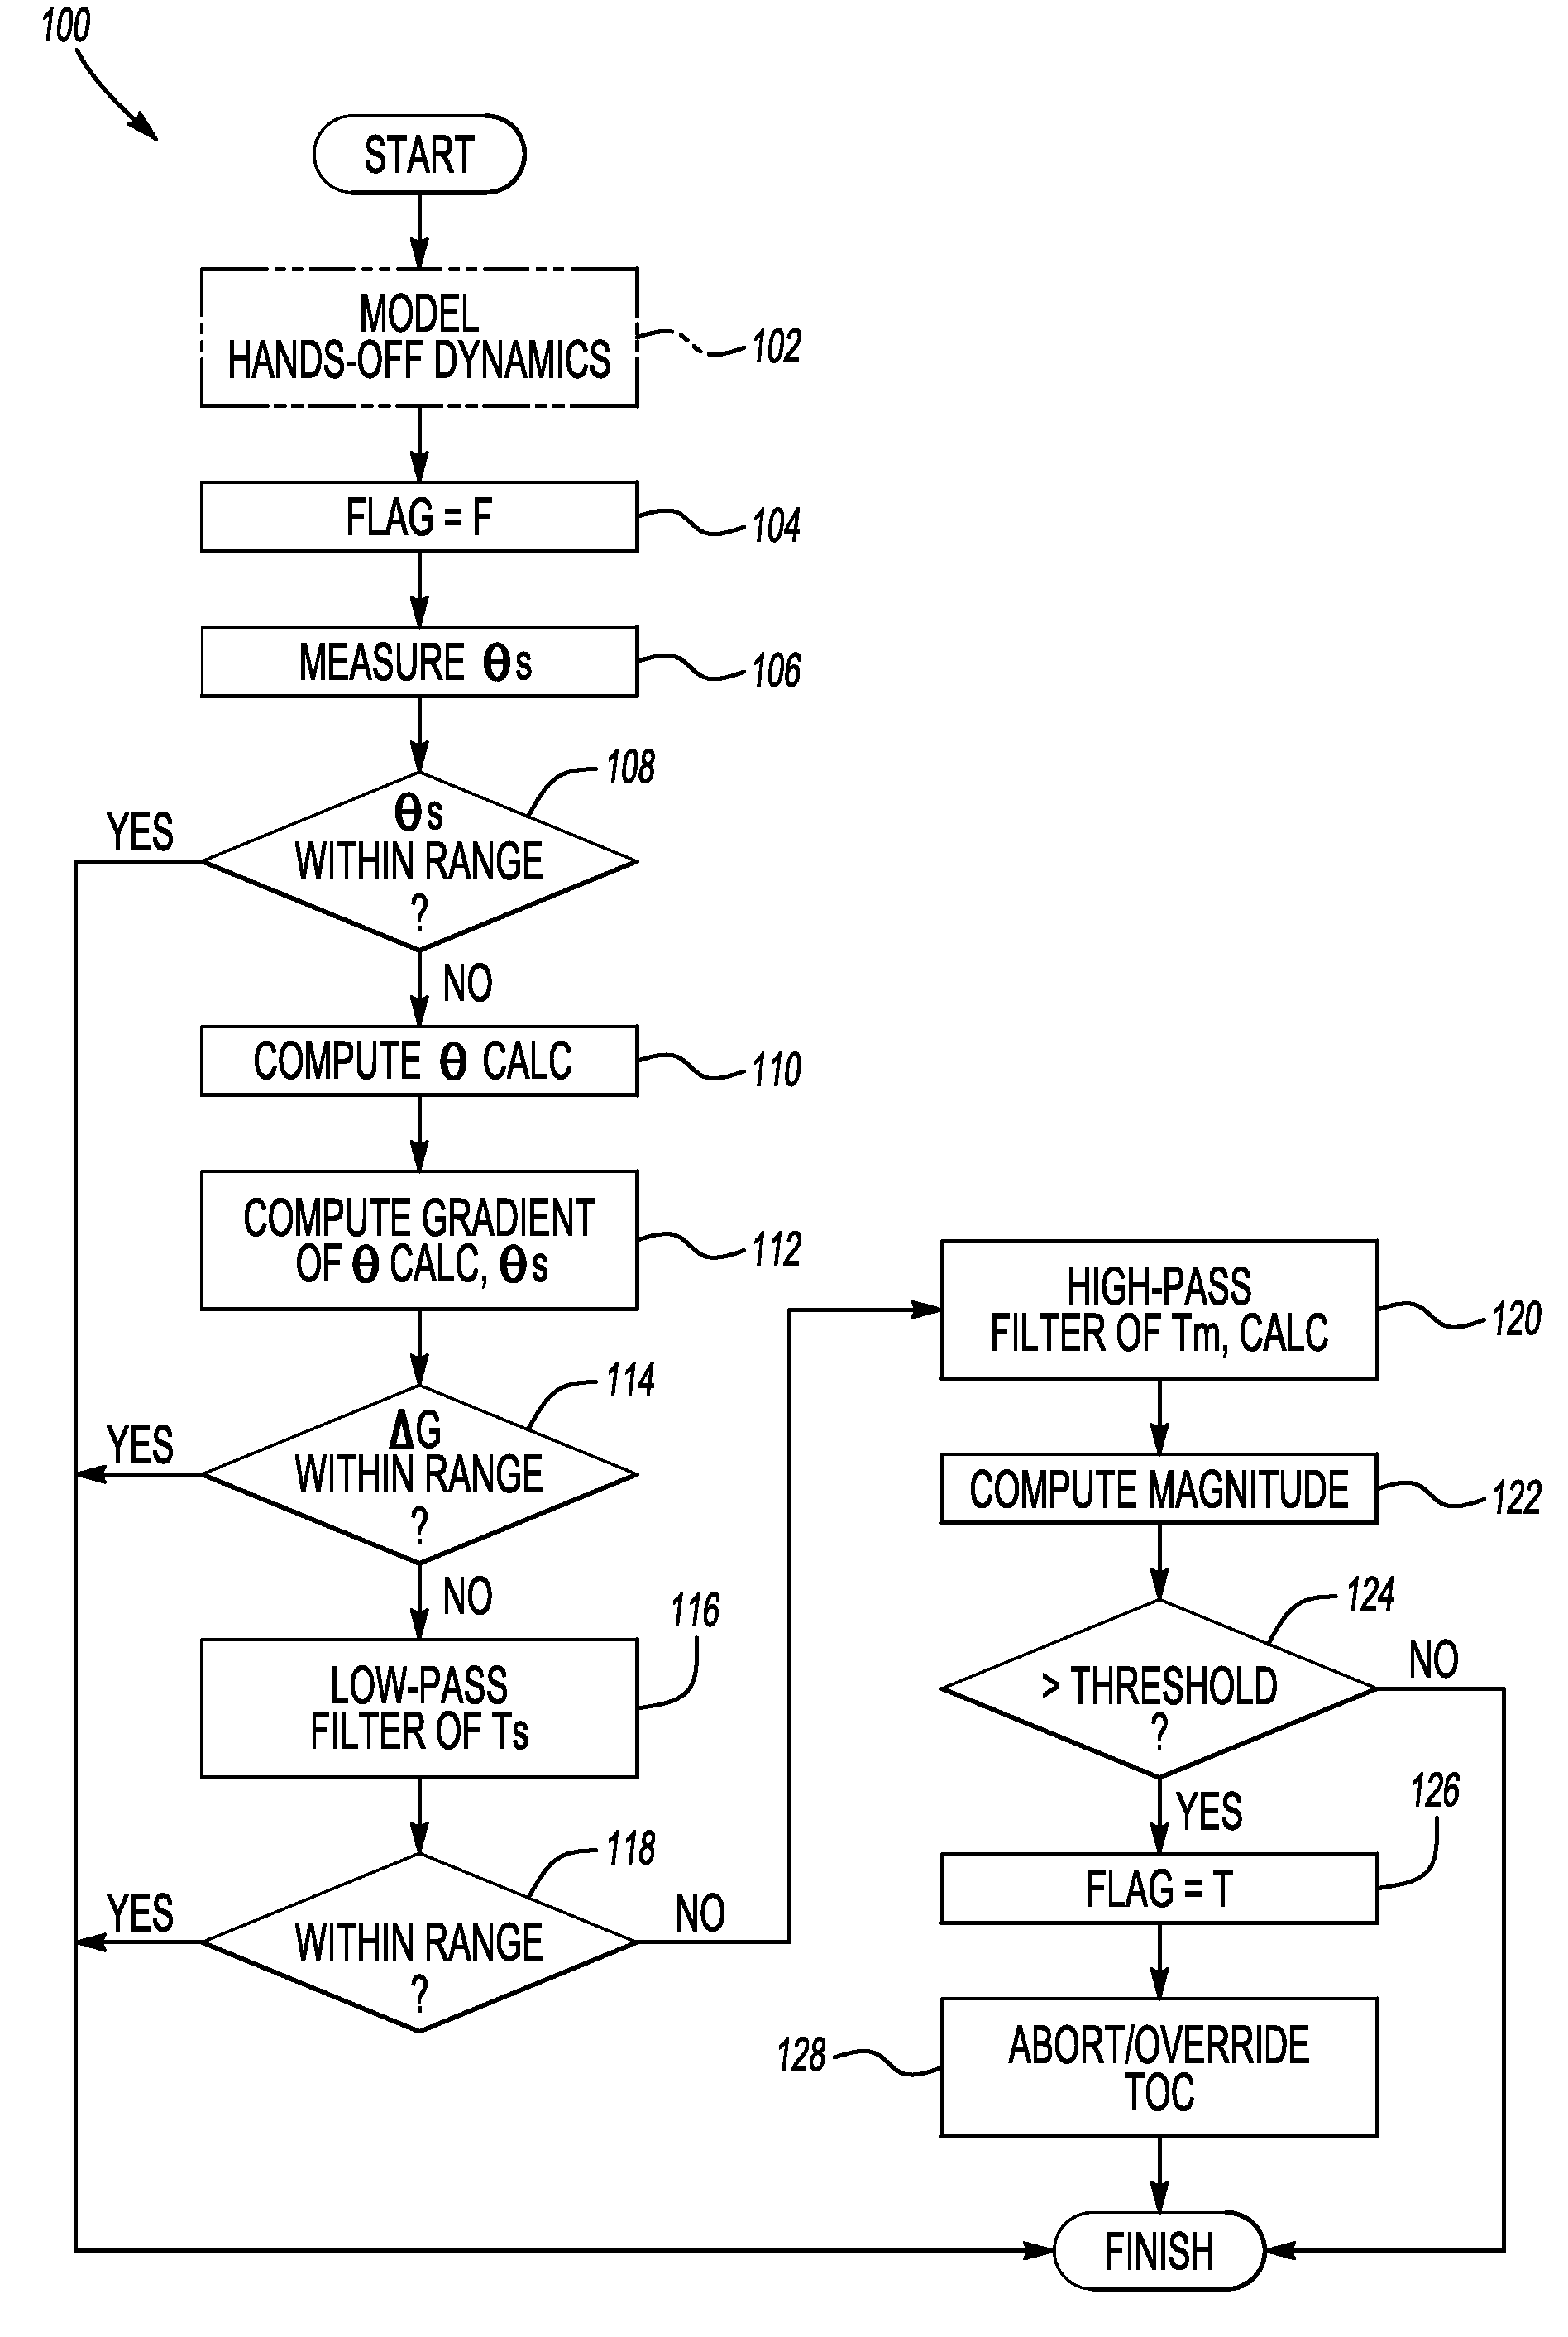 Detection of driver intervention during a torque overlay operation in an electric power steering system